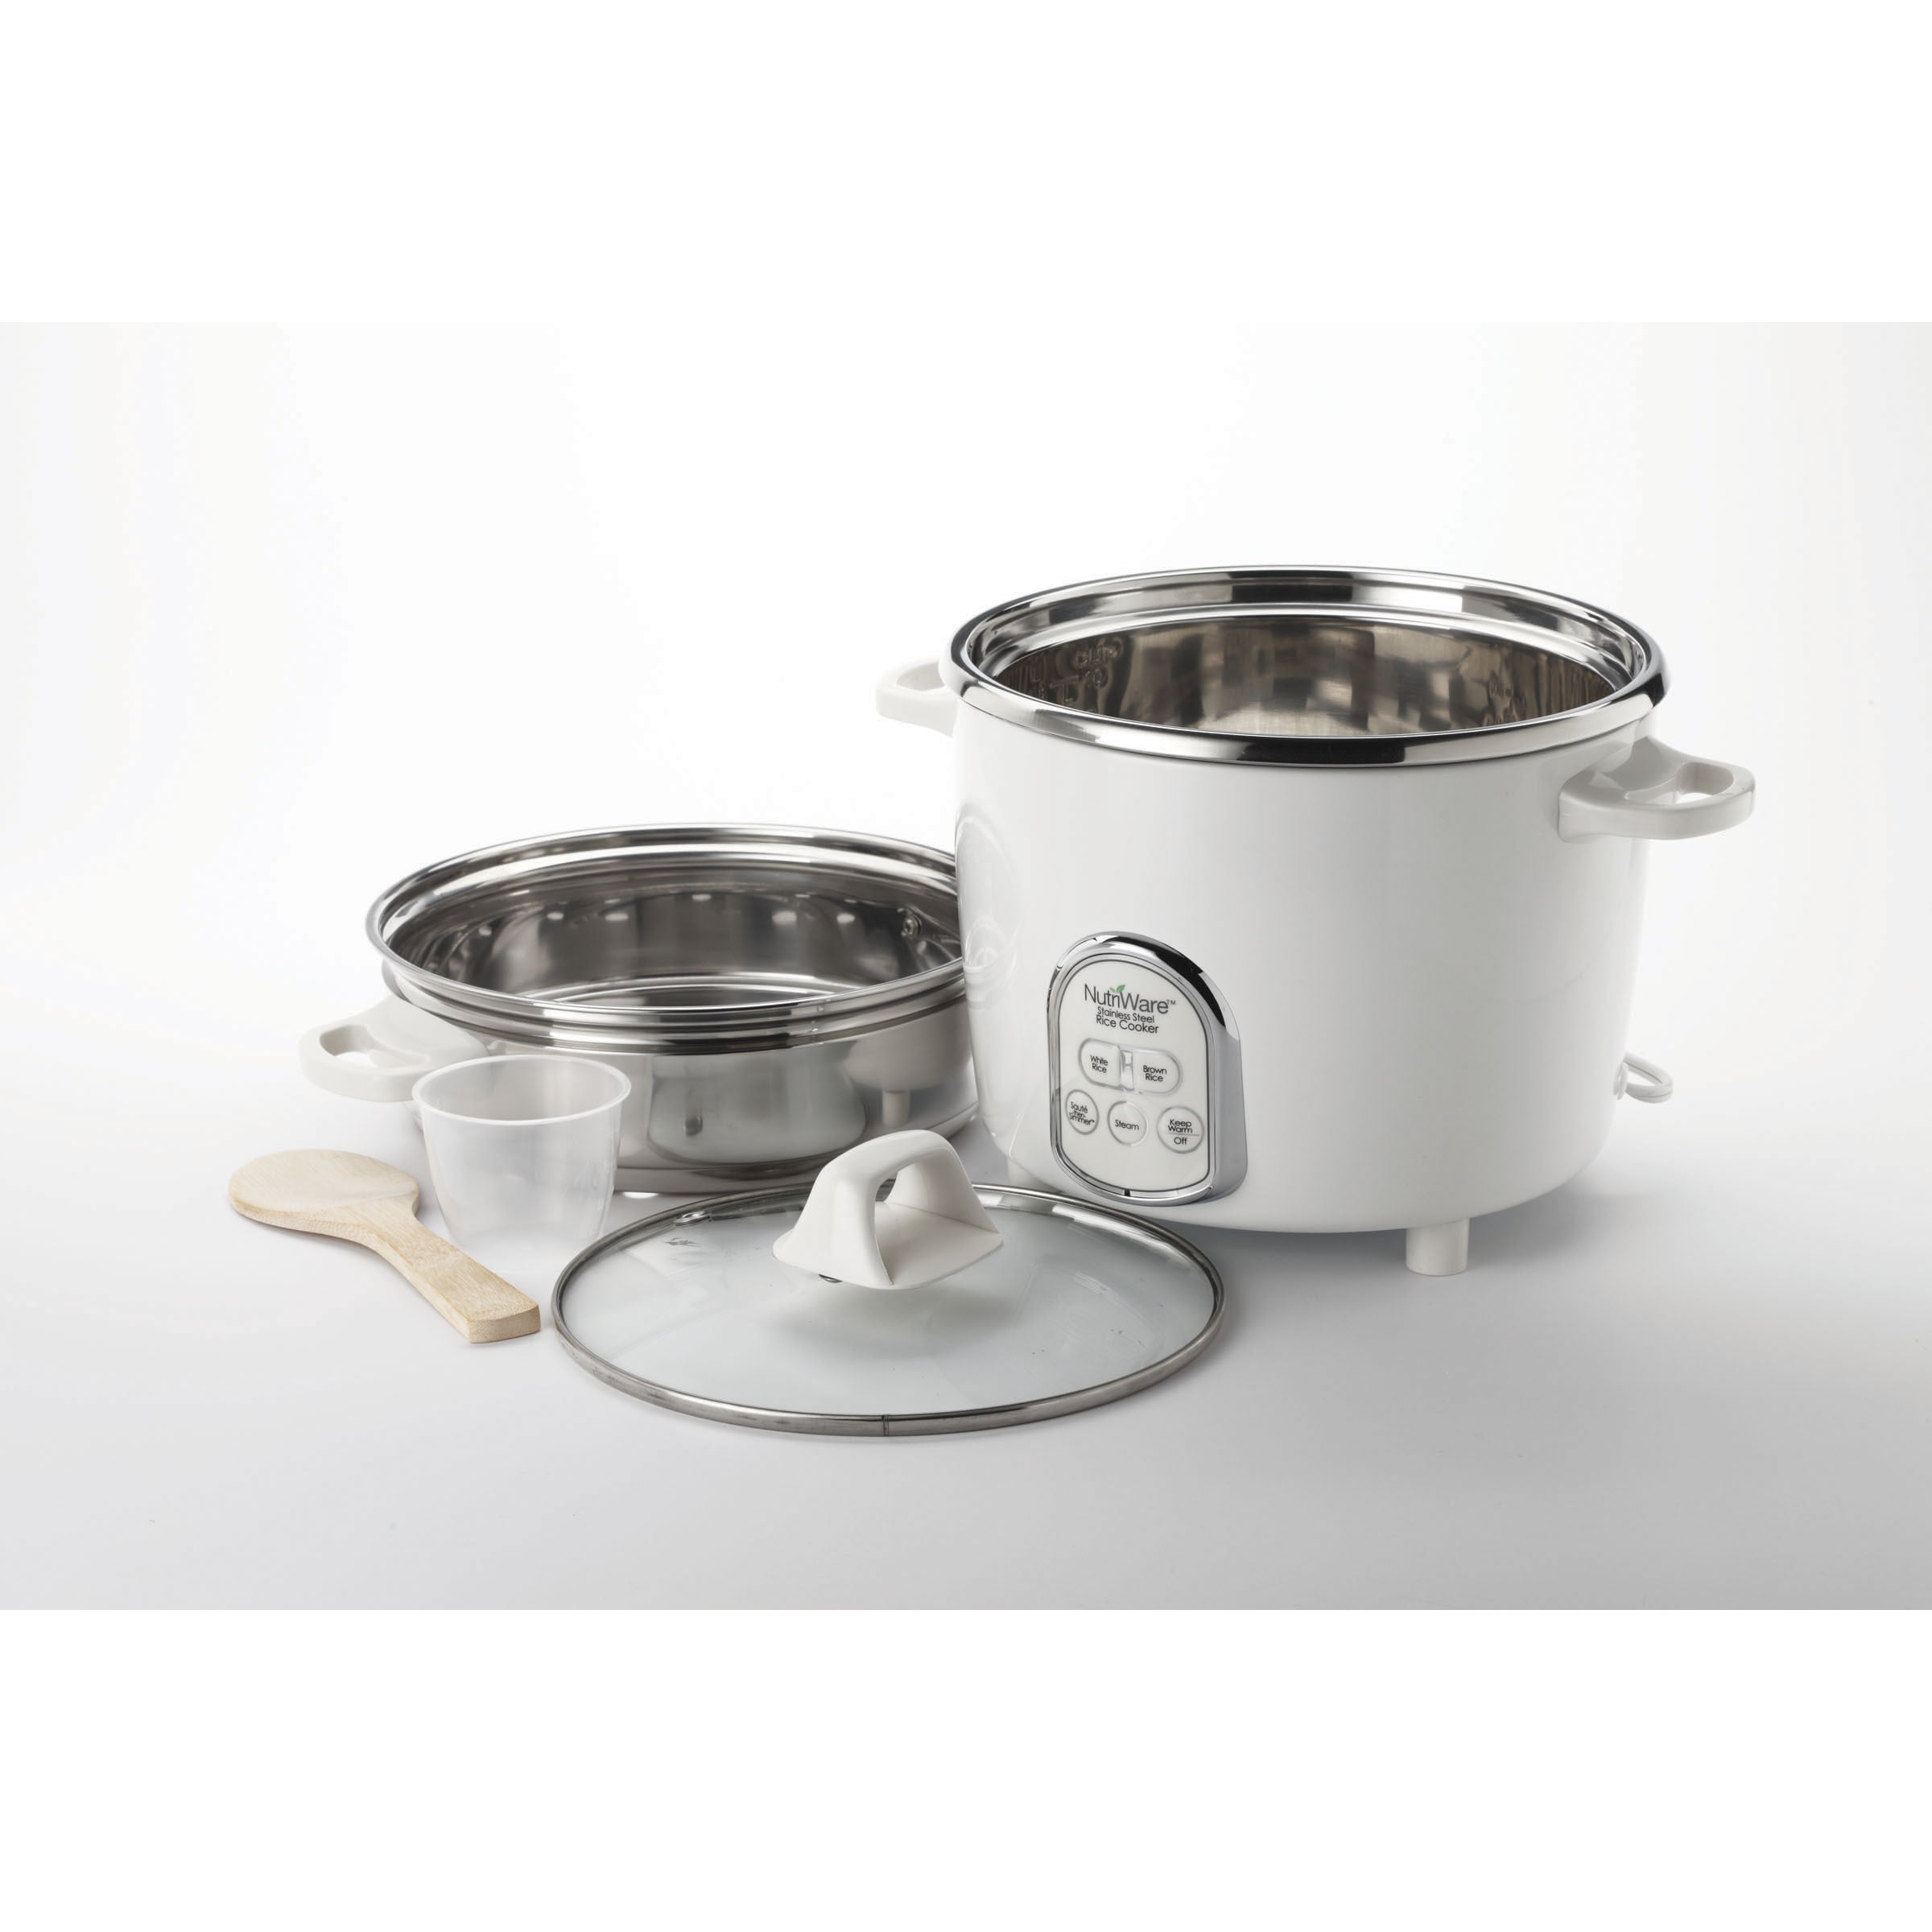 https://ak1.ostkcdn.com/images/products/12672769/Aroma-NRC-687SD-1SG-NutriWare-14-Cup-Digital-Rice-Cooker-and-Food-Steamer-18f0f32f-e685-4207-a5ee-ee927b940224.jpg